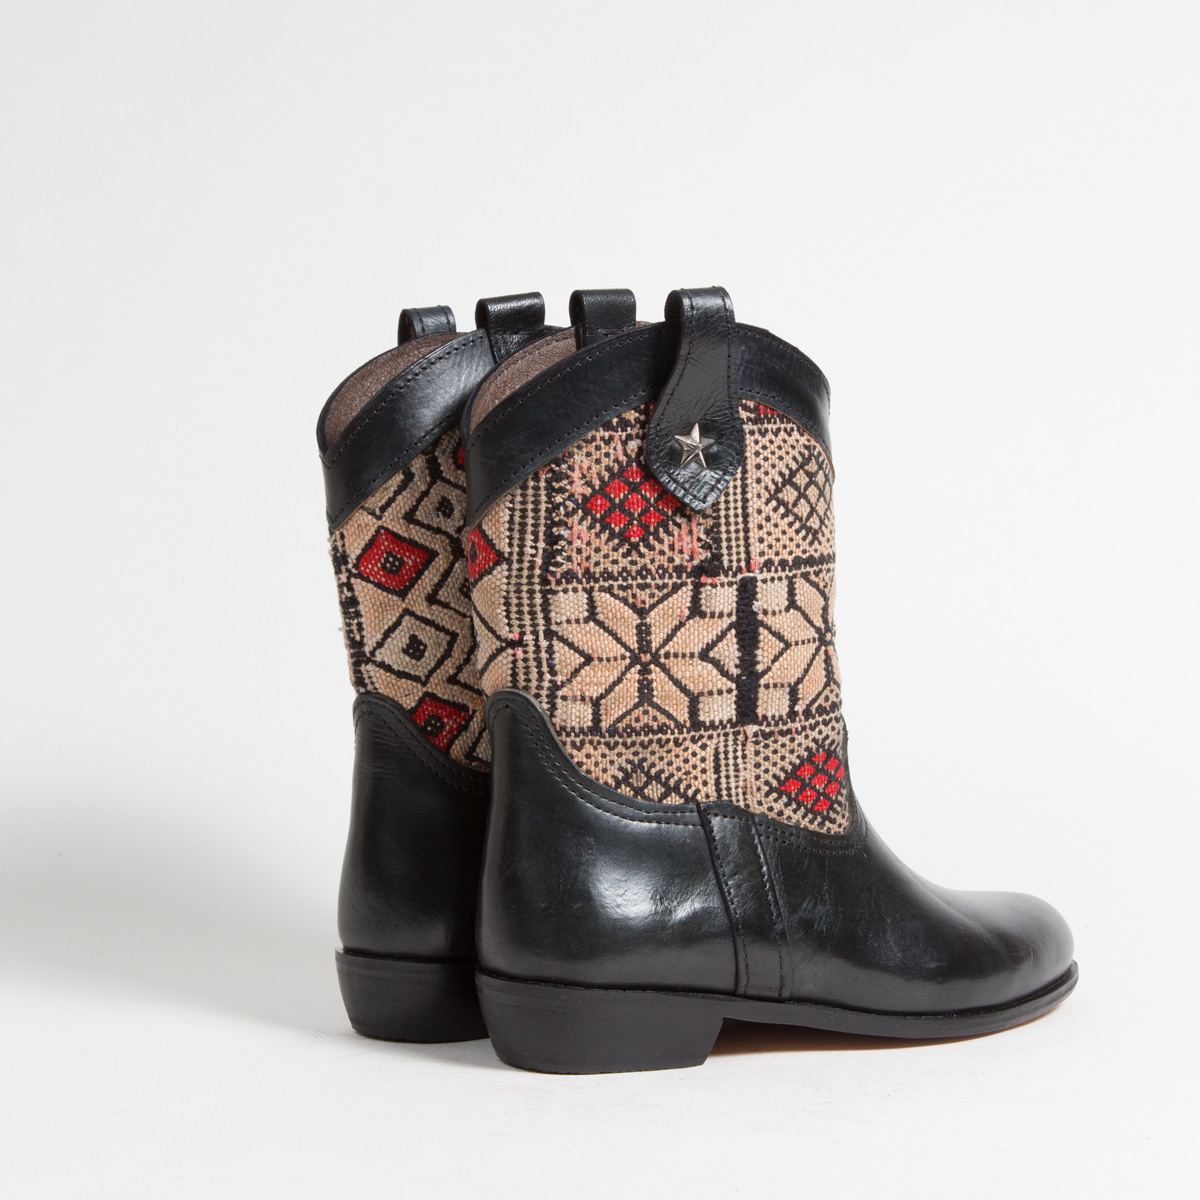 Bottines Kilim cuir mababouche artisanales (Réf. MN12-40)